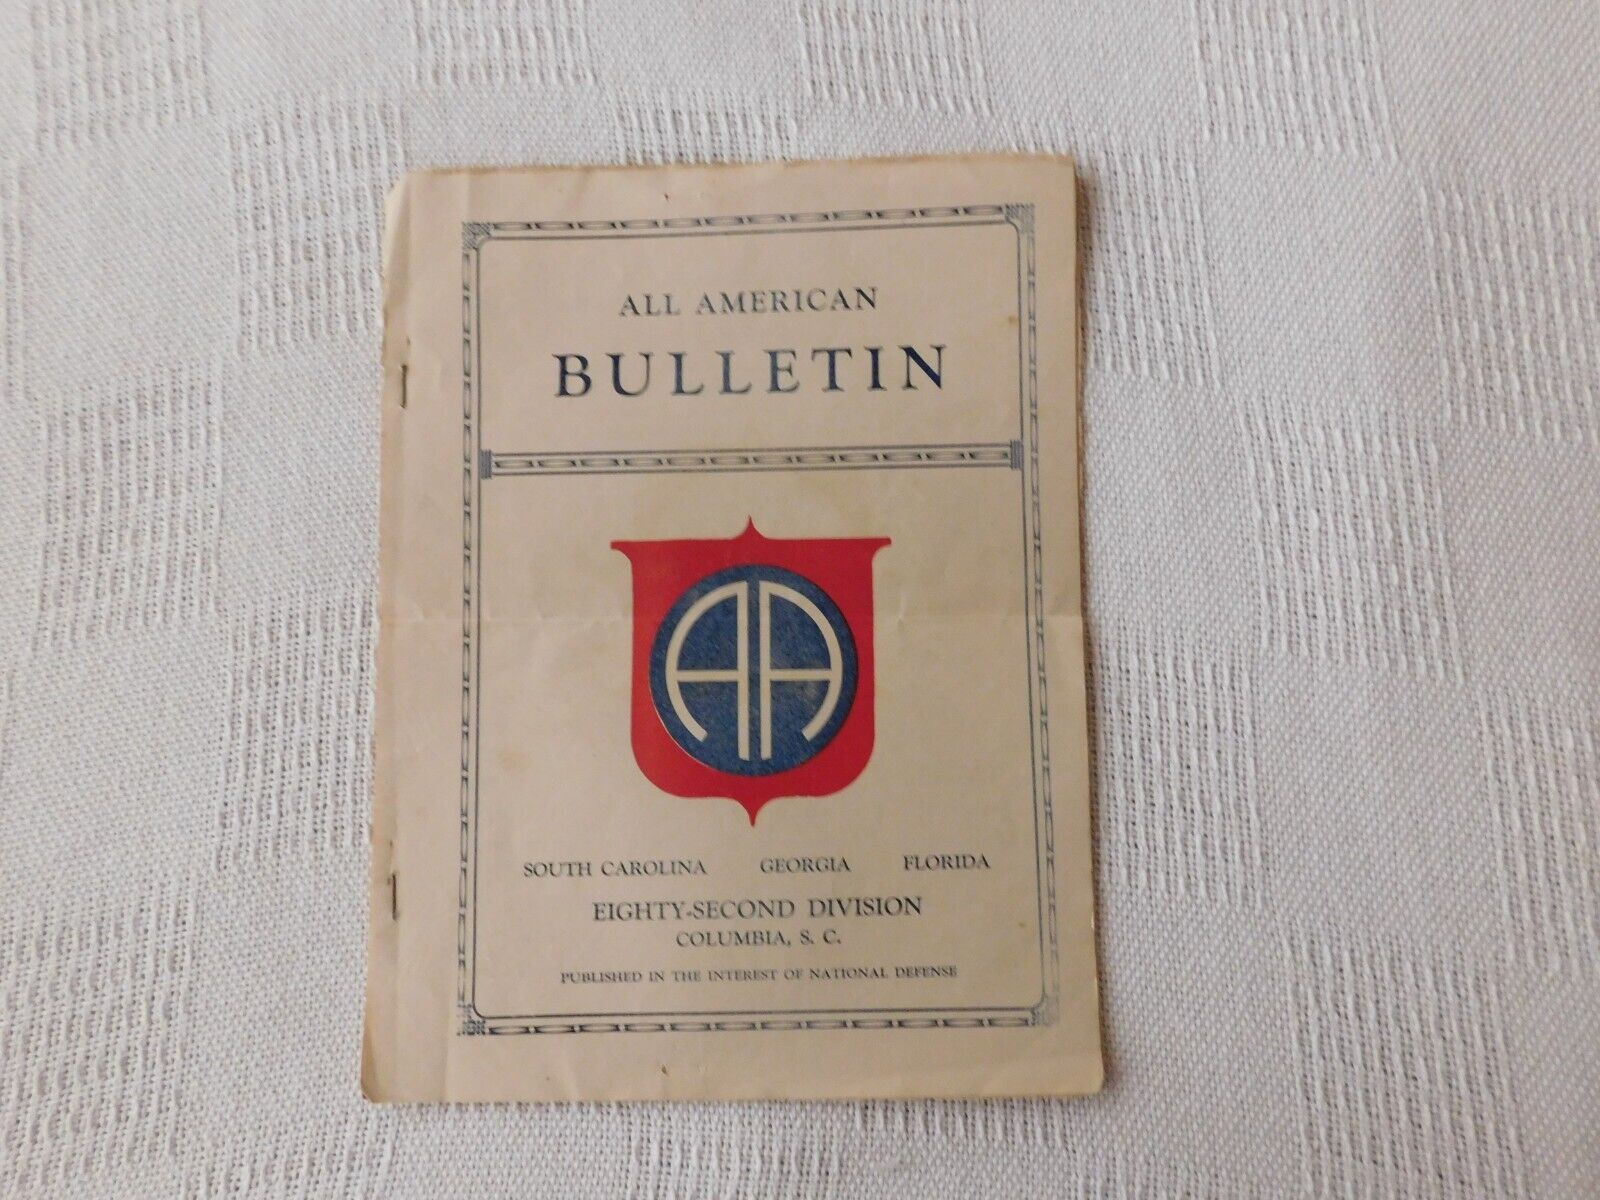 1927 All American Bulletin, Eighty Second Division, U.S. Army, SC